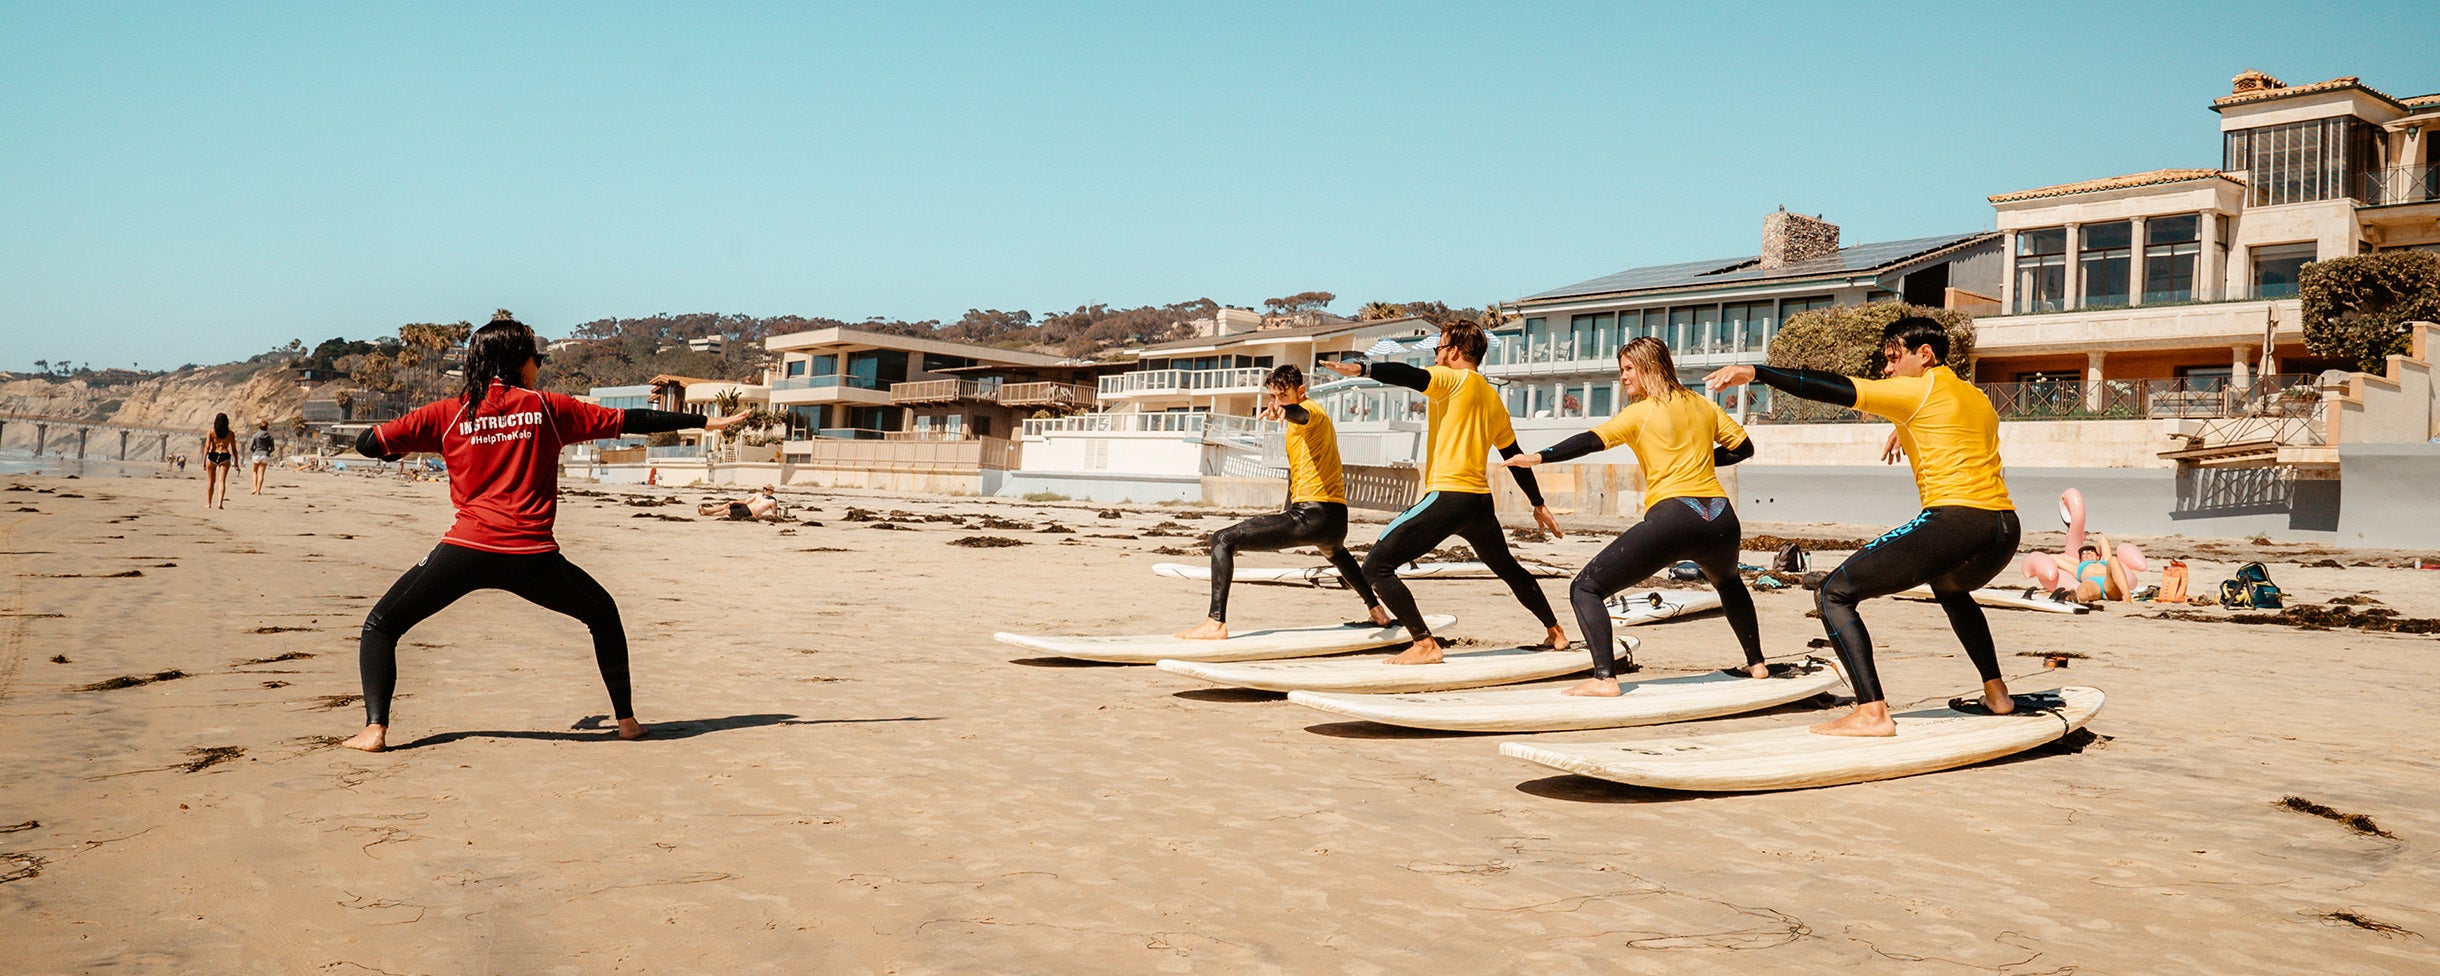 Lessons - Private Surf Lessons in La Jolla, California with Everyday California